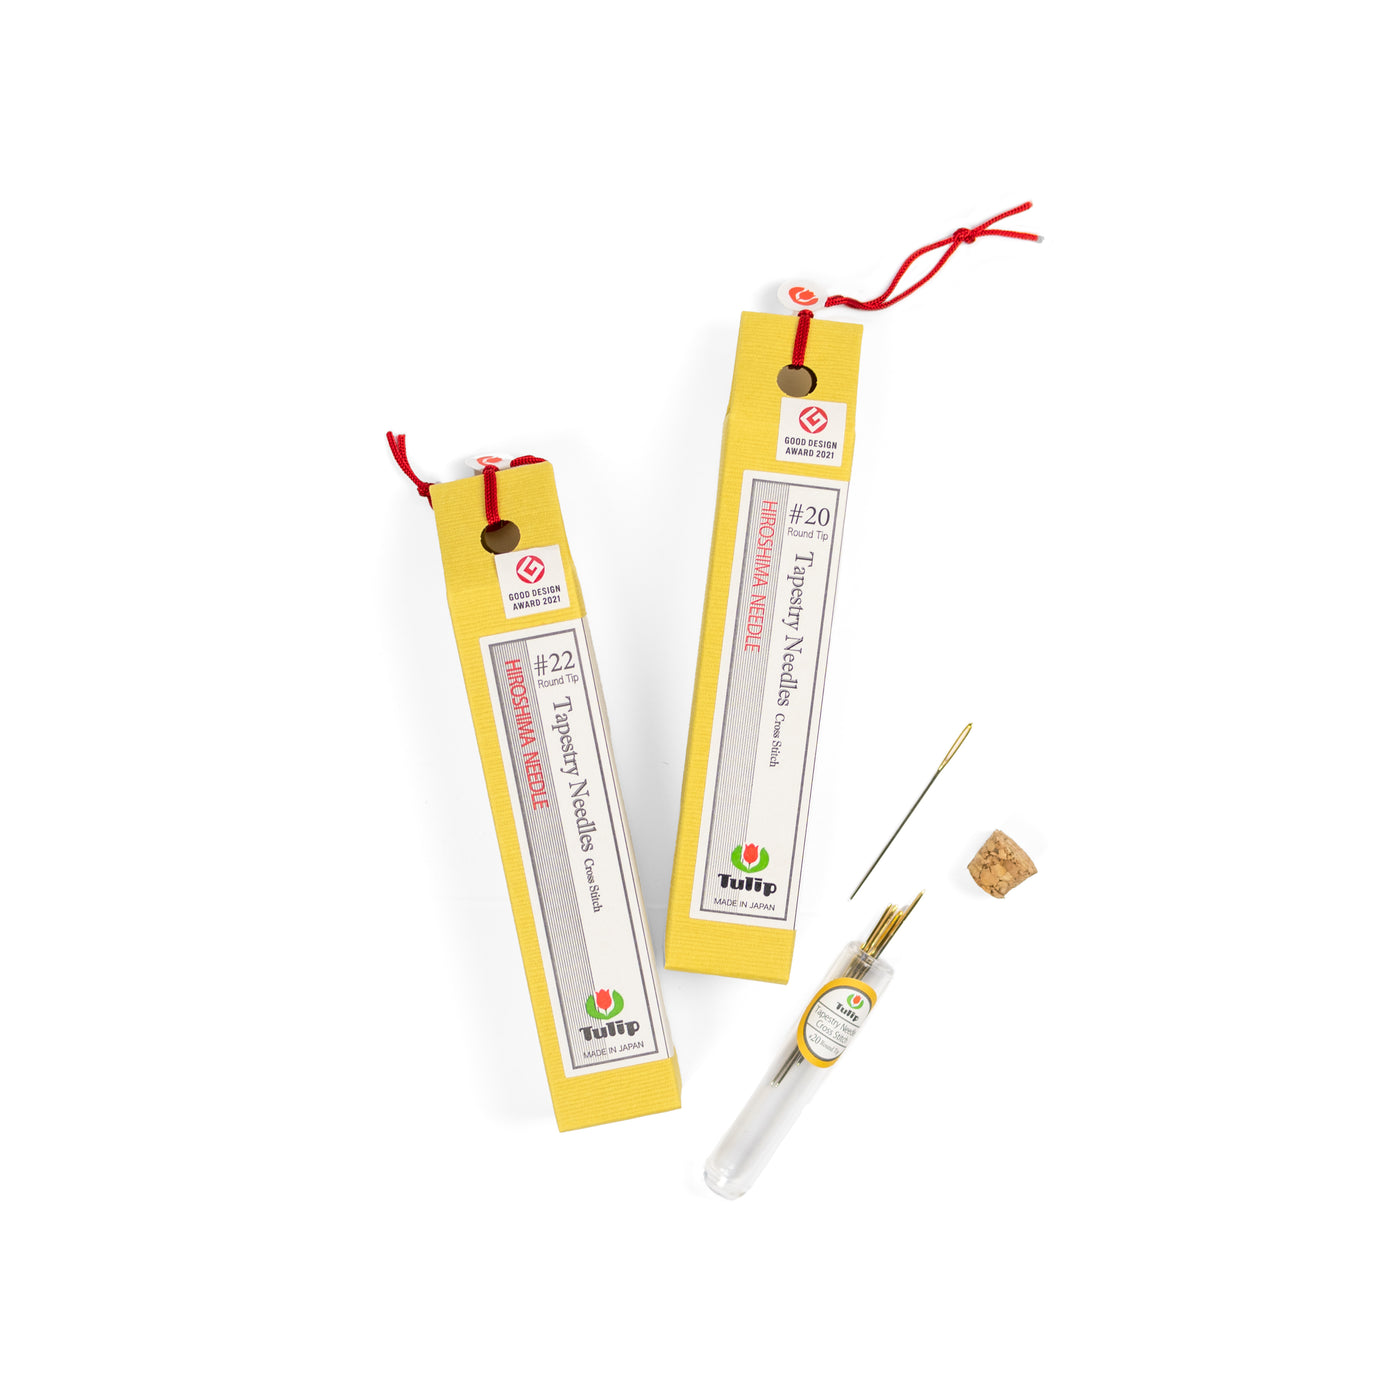 Yellow boxes with red tie at the top and printed sticker labels noting needle size and brand. To the right of the two boxes is an open tube of needles with a cork top.